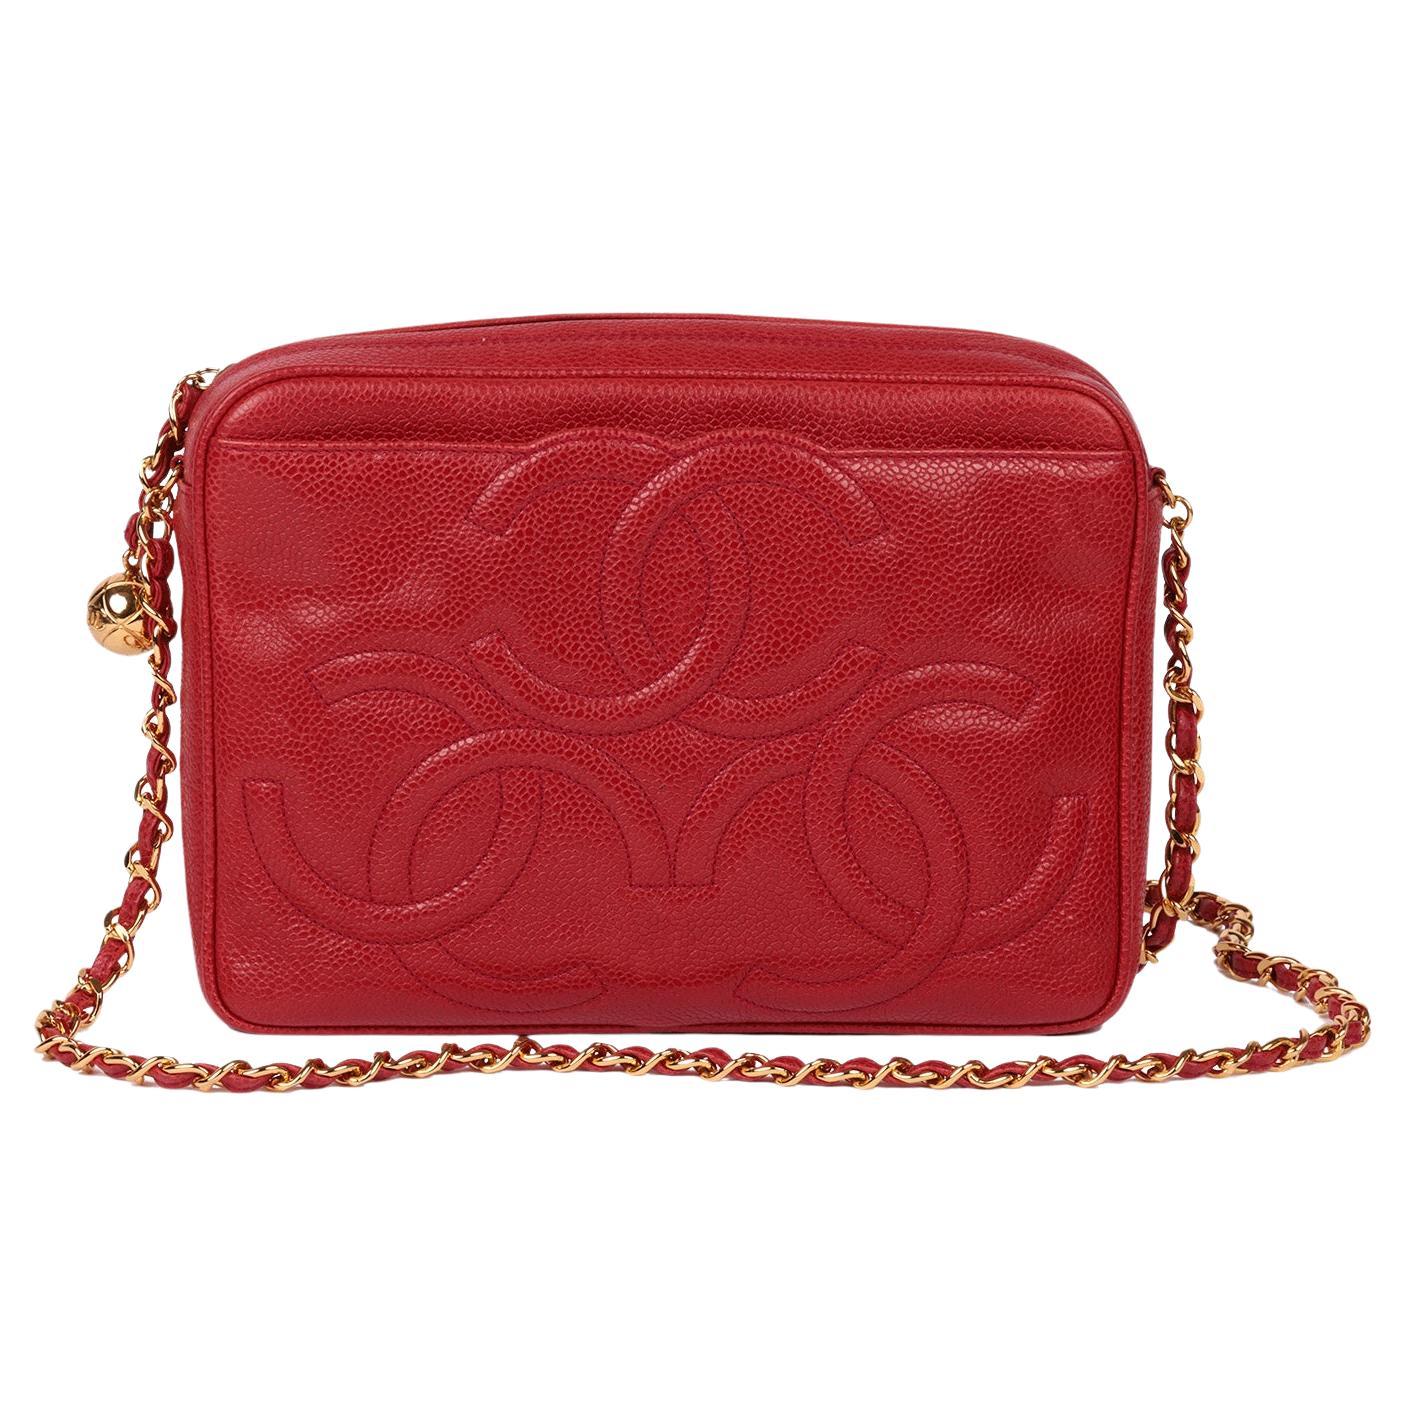 Chanel Red Caviar Leather Vintage Timeless Camera Bag For Sale